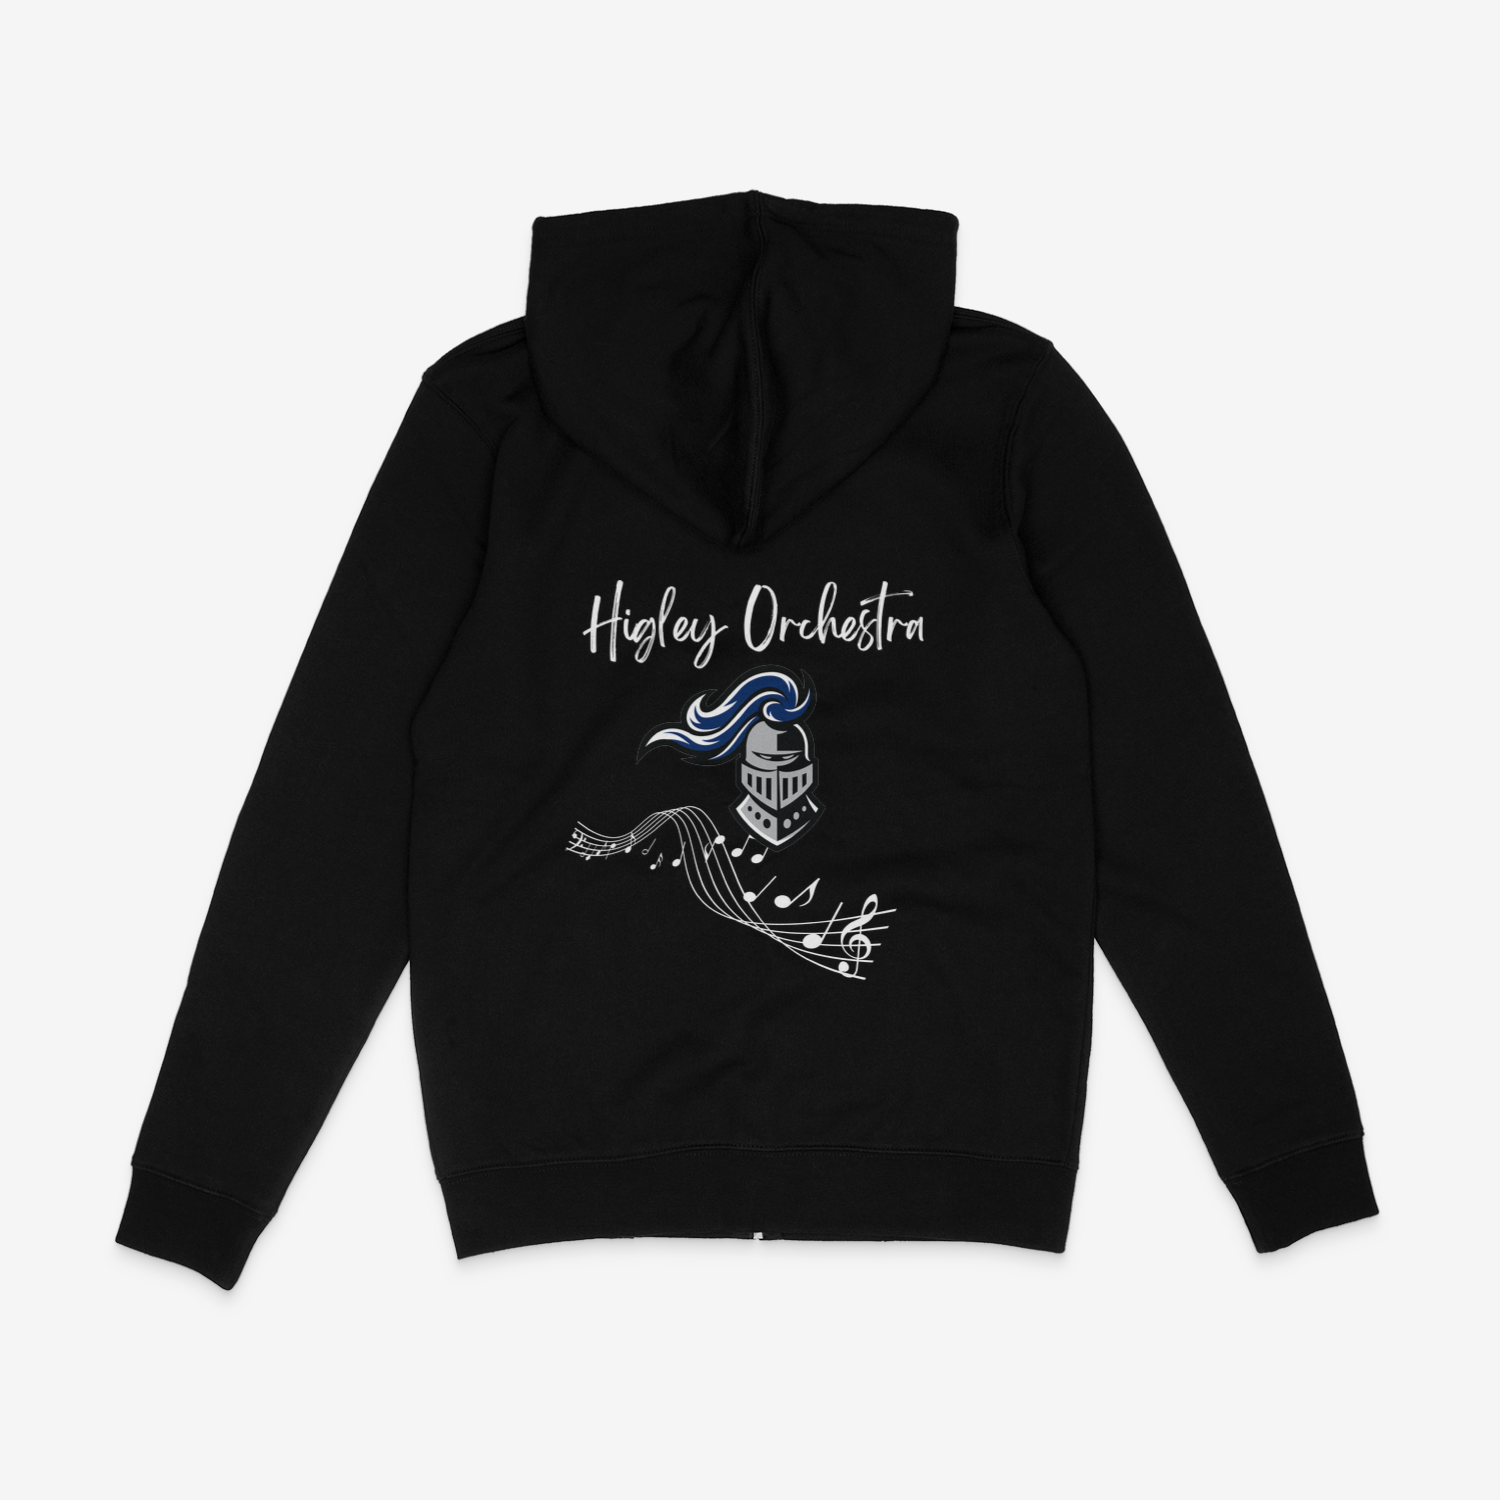 Higley Orchestra Zipper Hoodie - Single Graphic